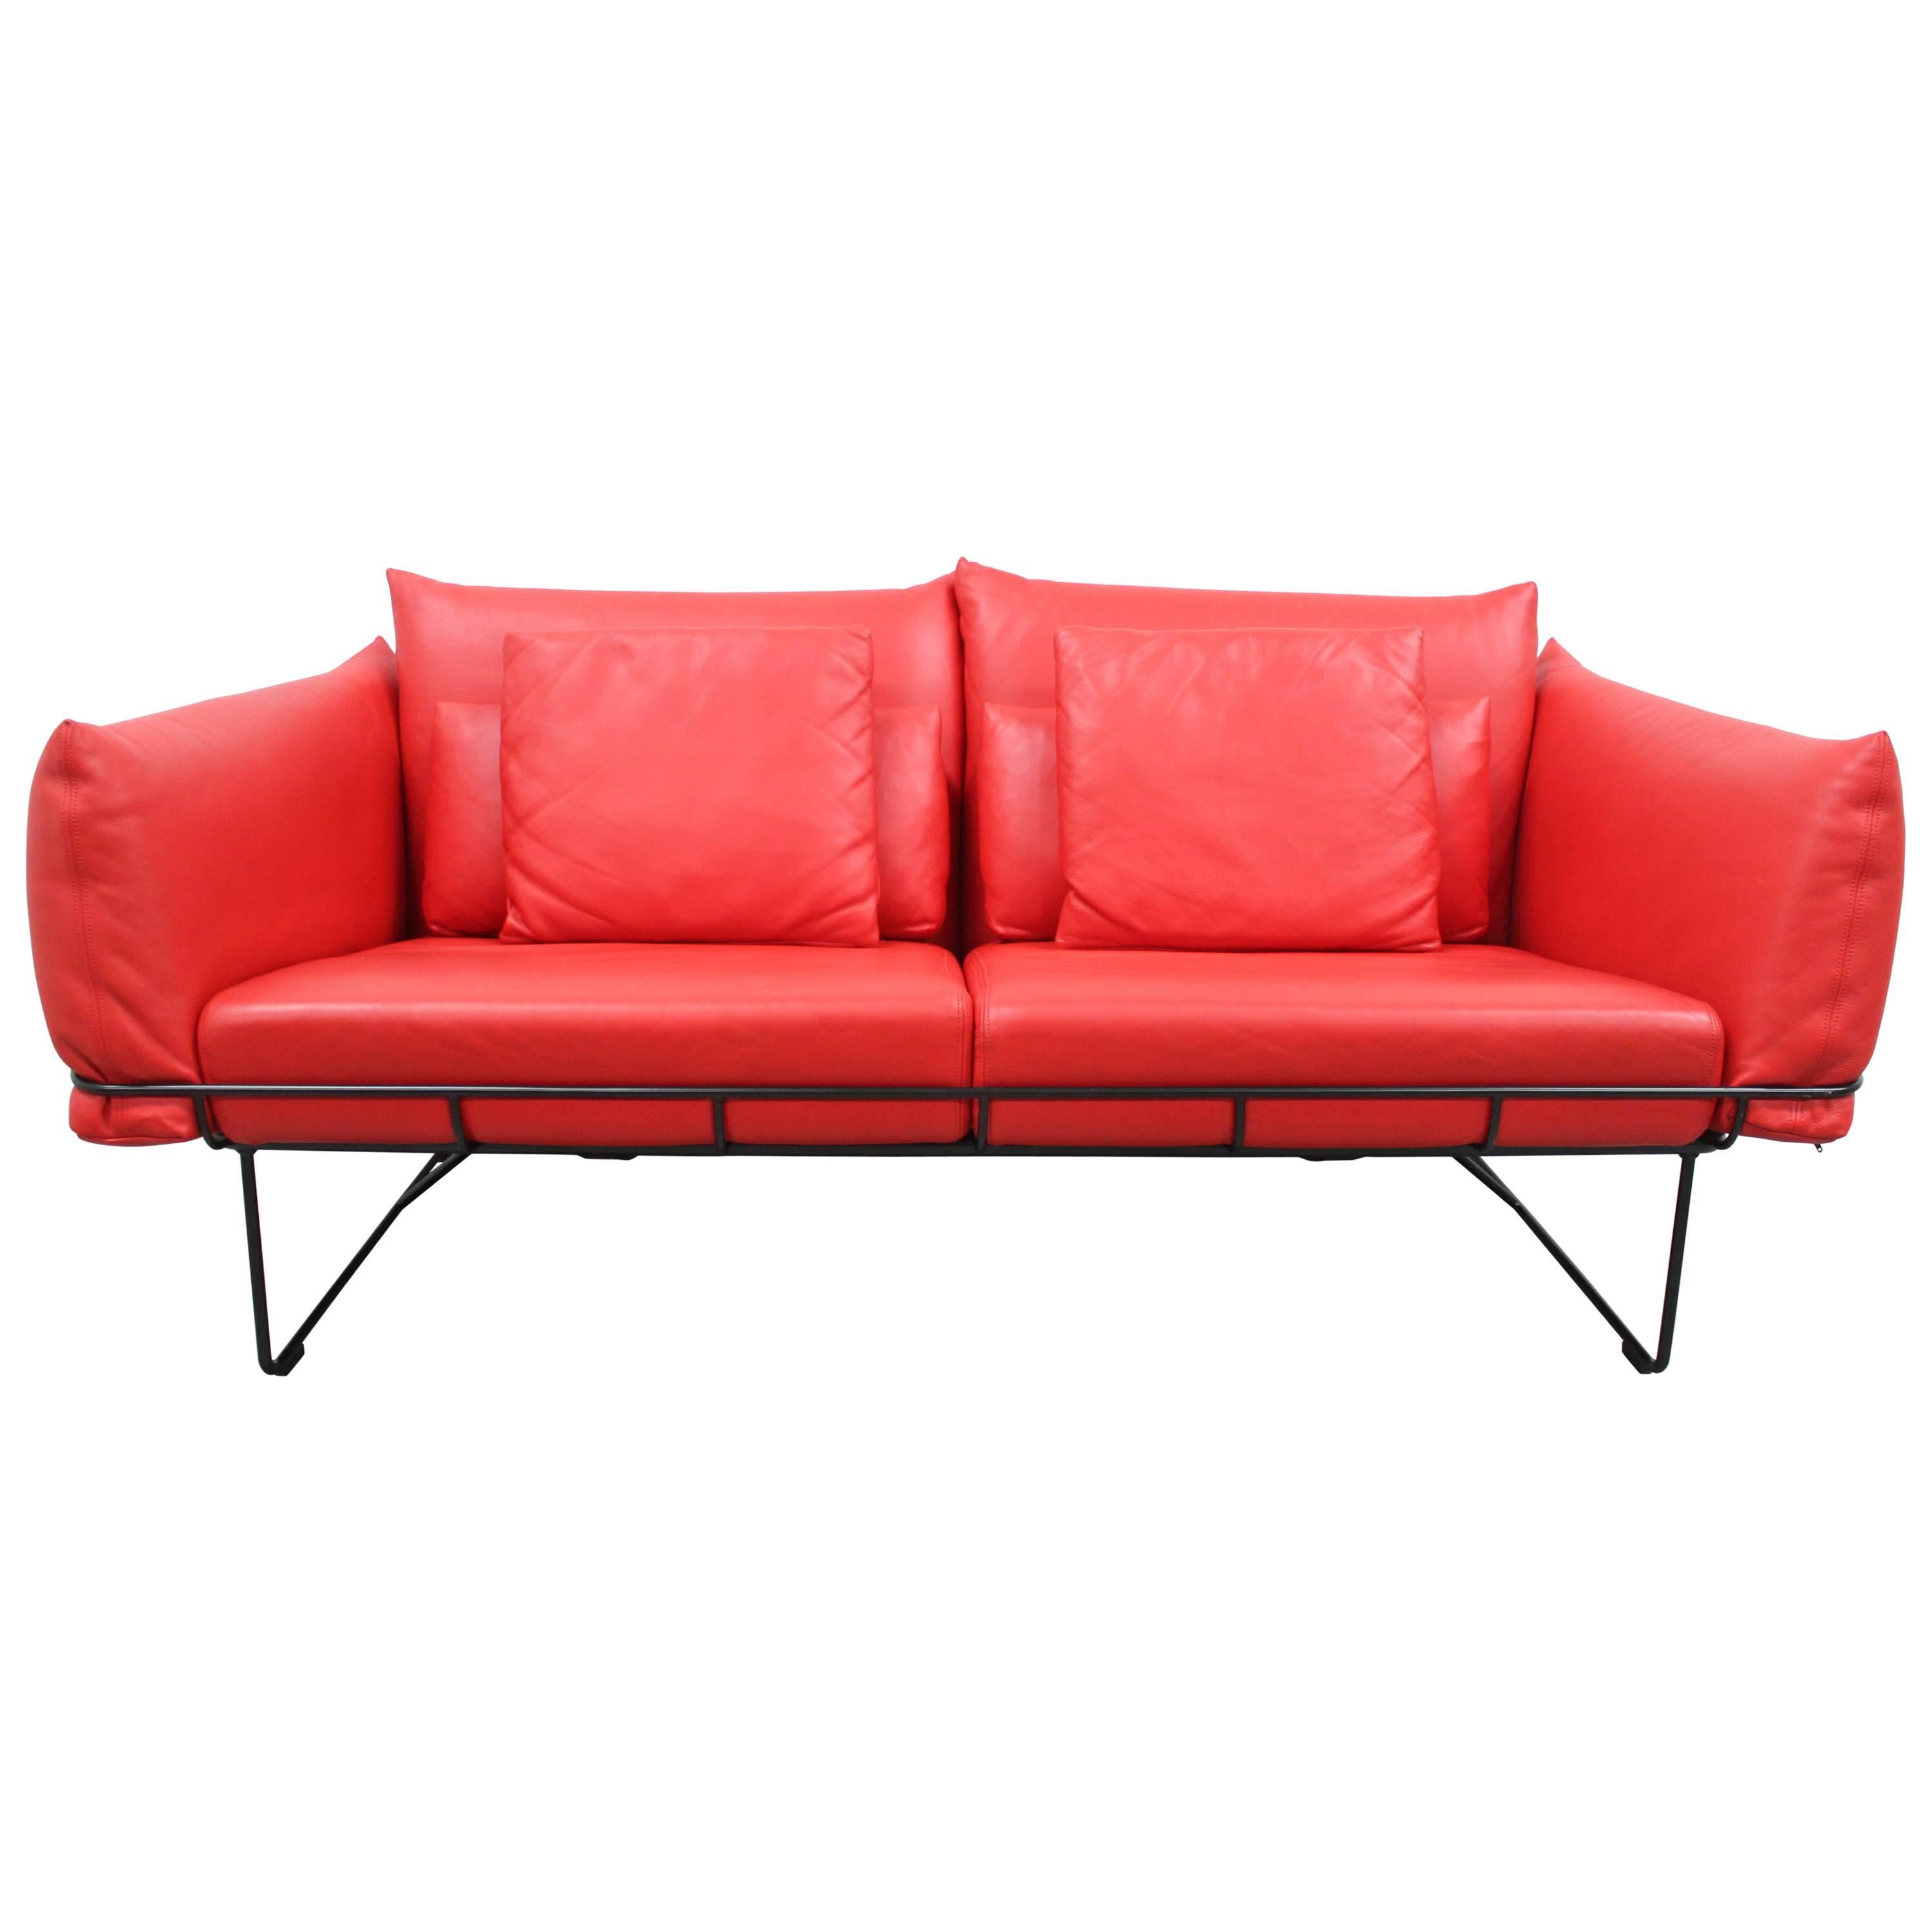 Herman Miller "Wireframe" Two-Seat Sofa in Red "MCL" Leather by Hecht & Colin